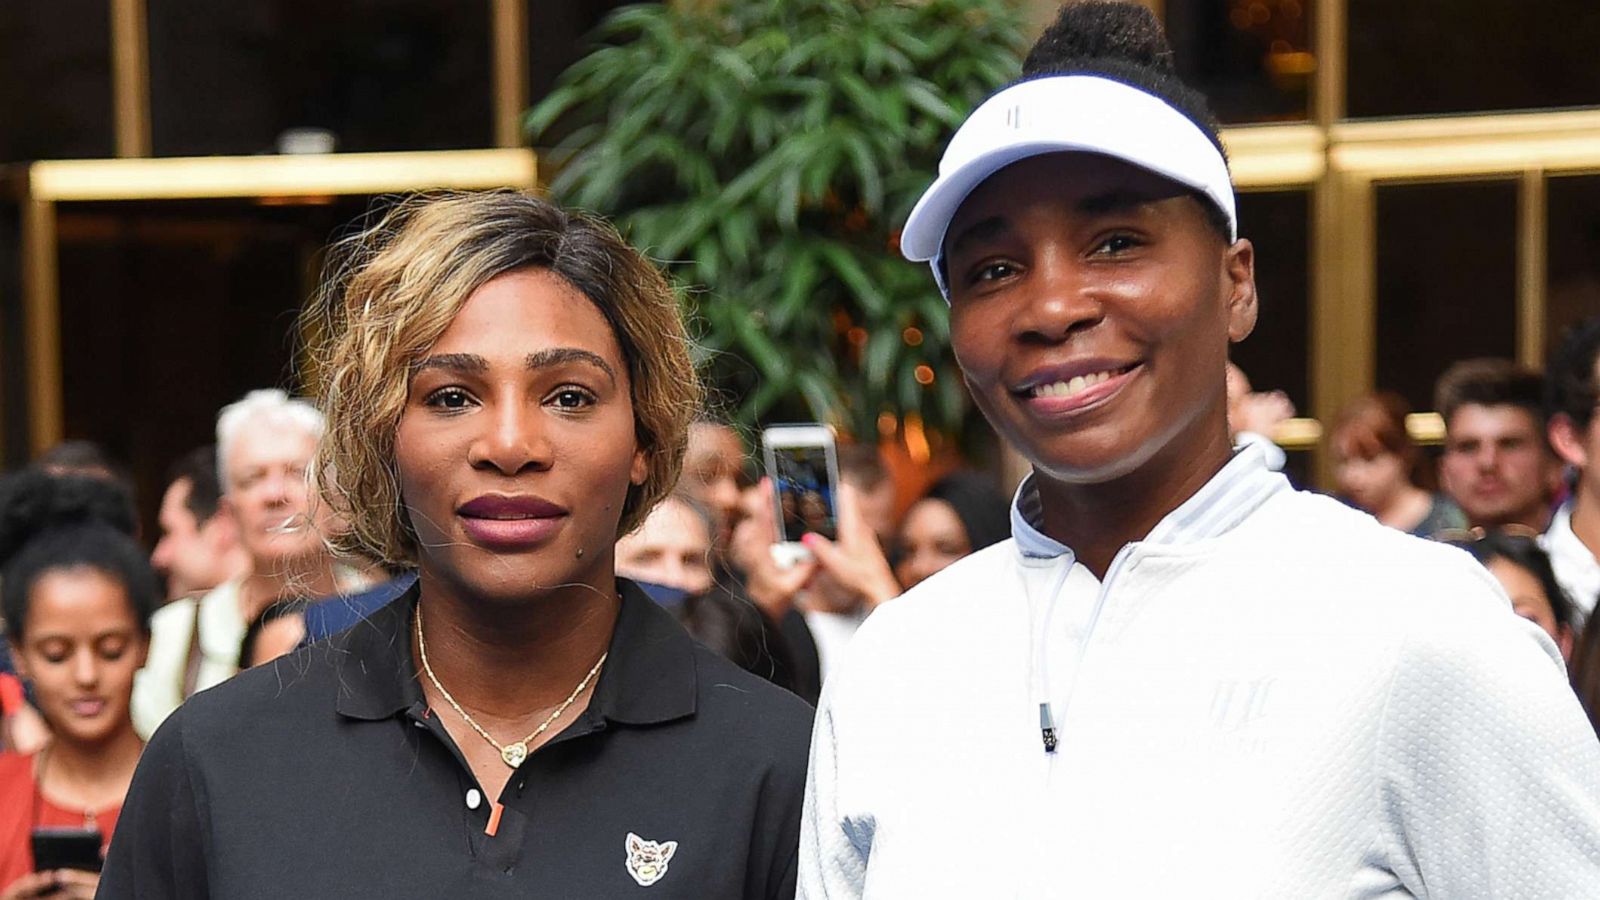 Venus and Serena Williams tease King Richard and reveal whose story it tells